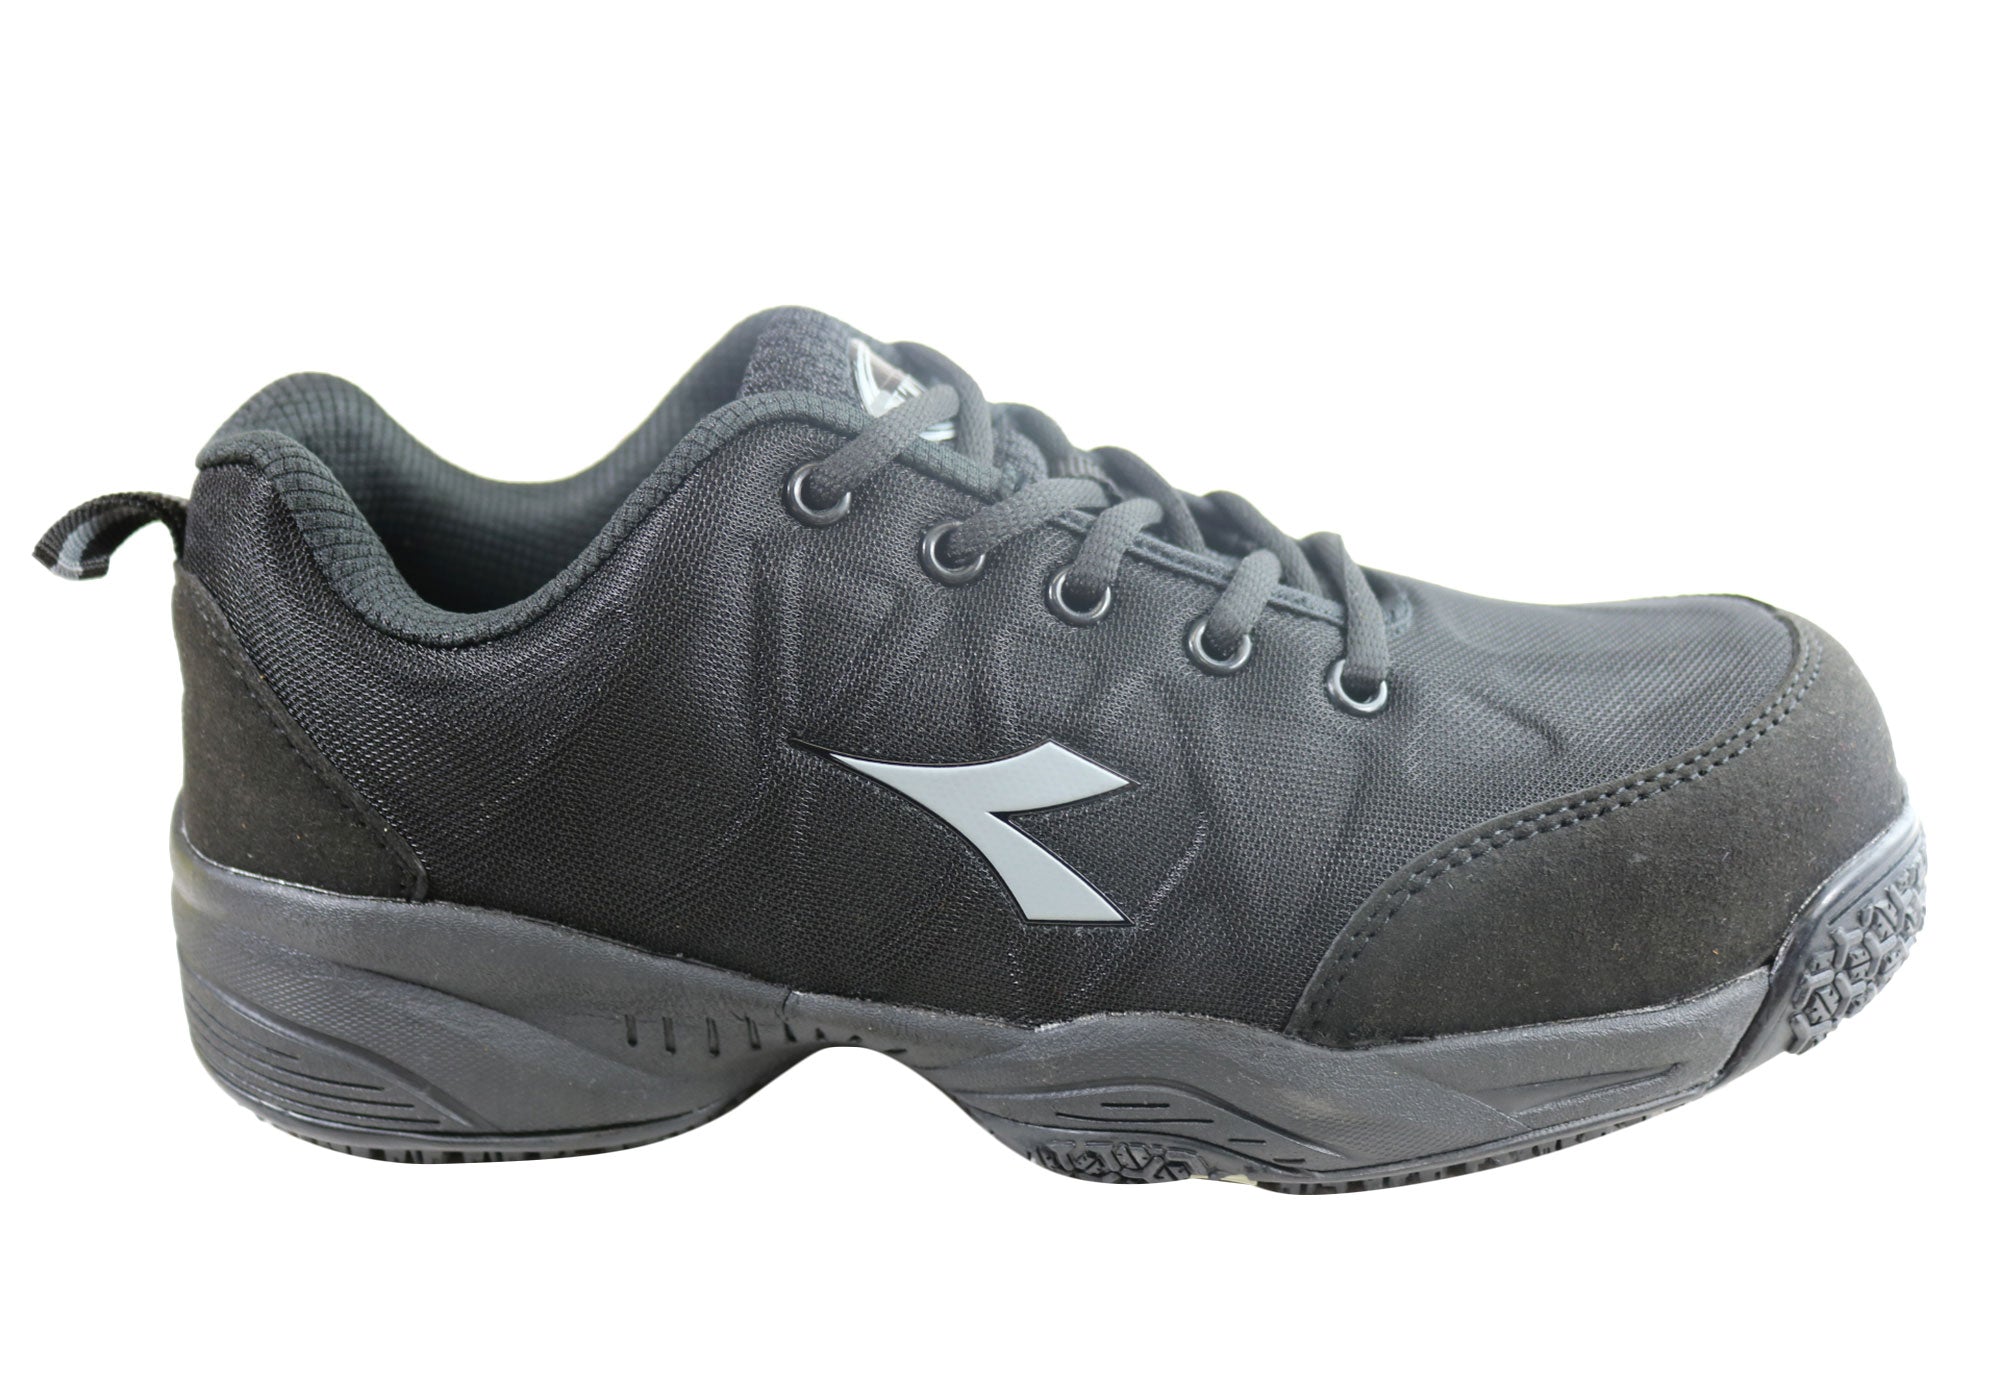 comfortable composite toe work shoes